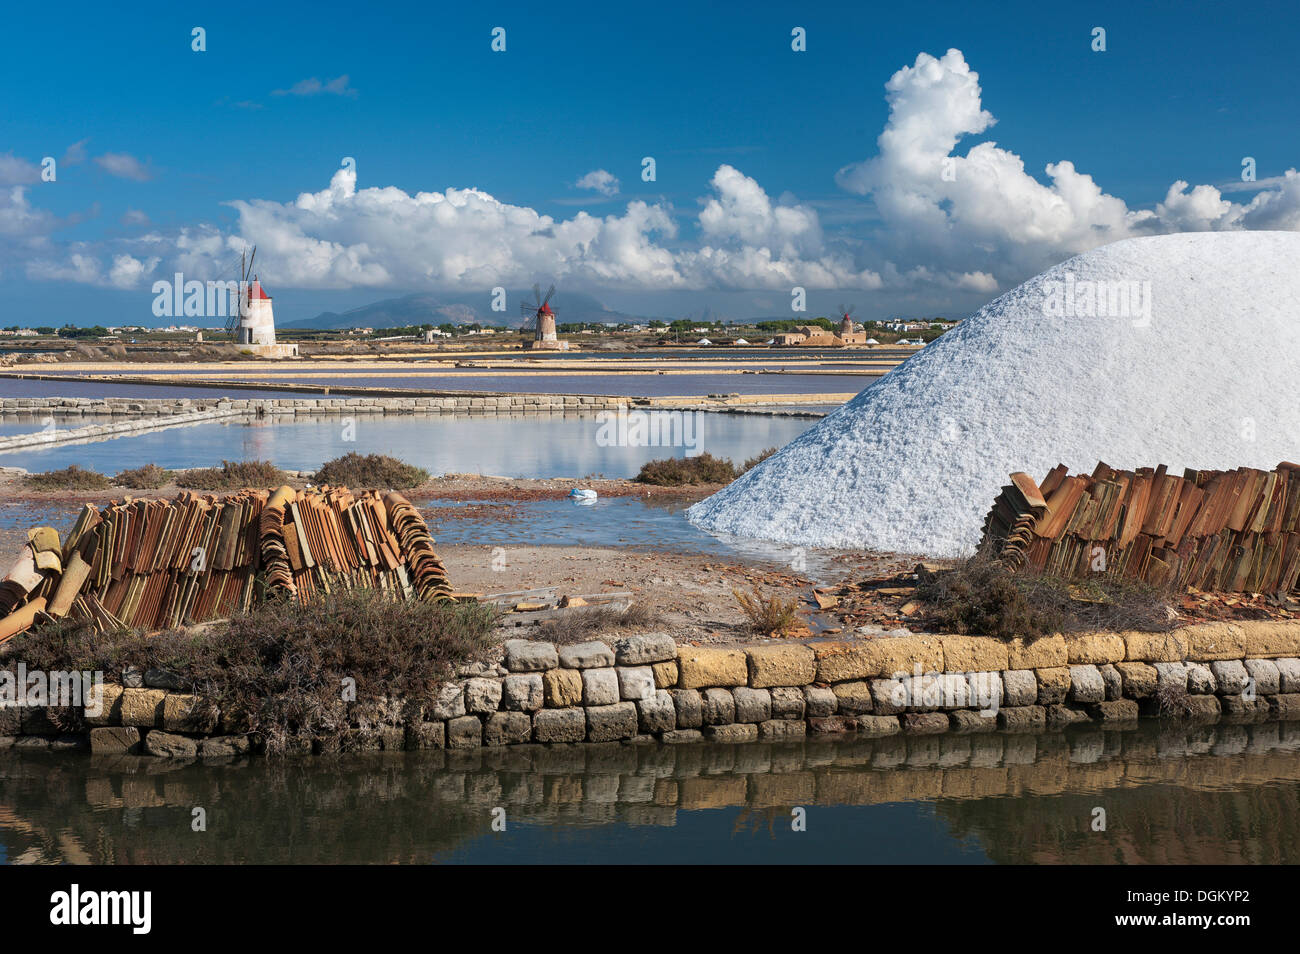 Salt stockpile, water basin and channel, windmills at, salt harvest in the Salinas, bei Trapani, Sicily, Italy Stock Photo